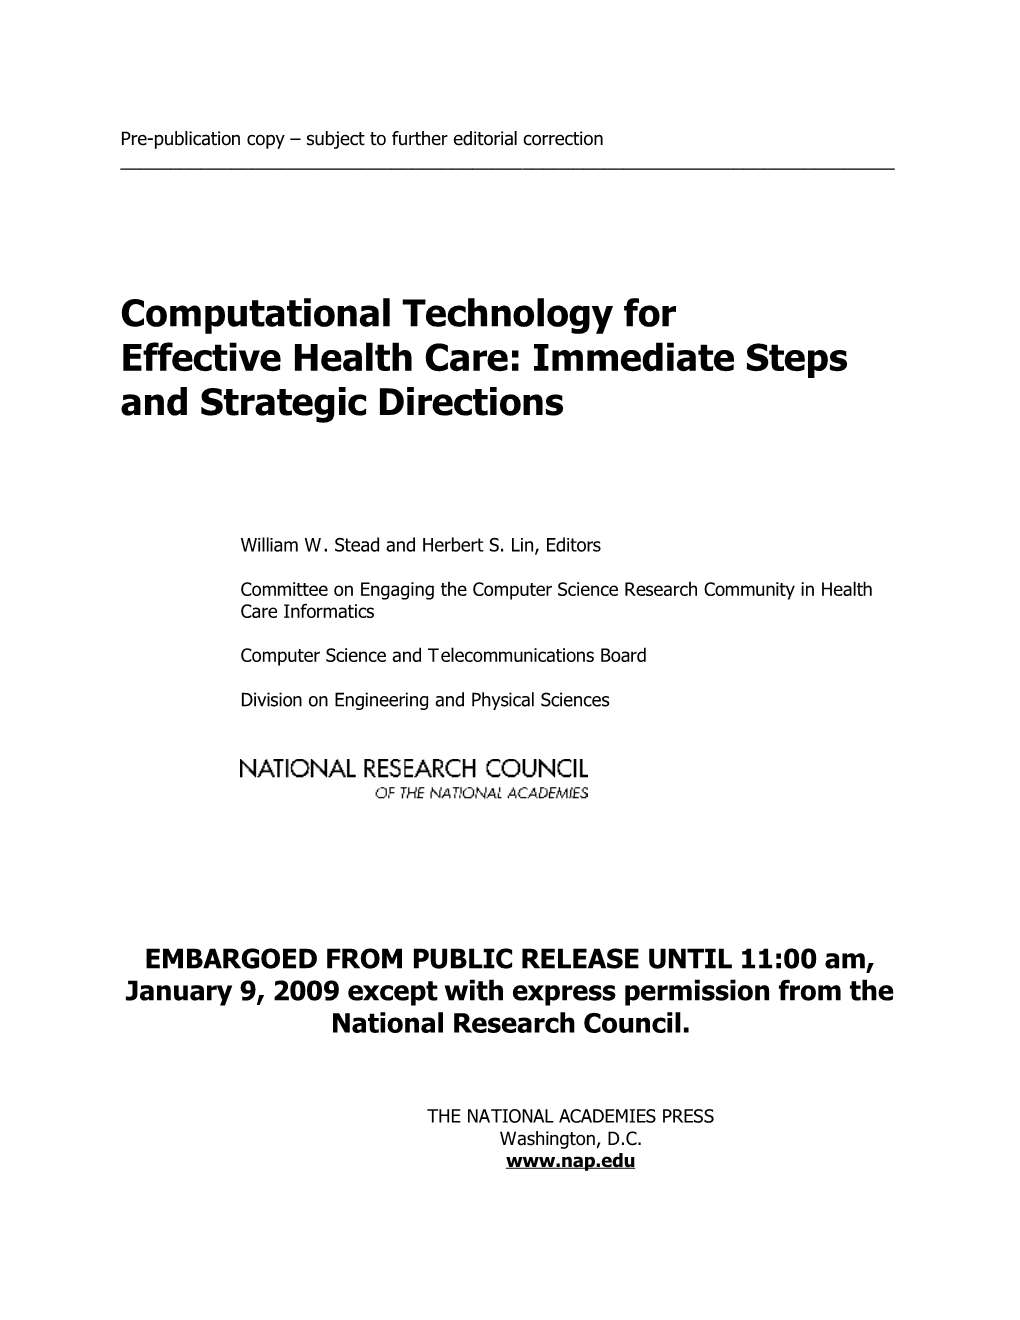 Computational Technology for Effective Health Care: Immediate Steps and Strategic Directions